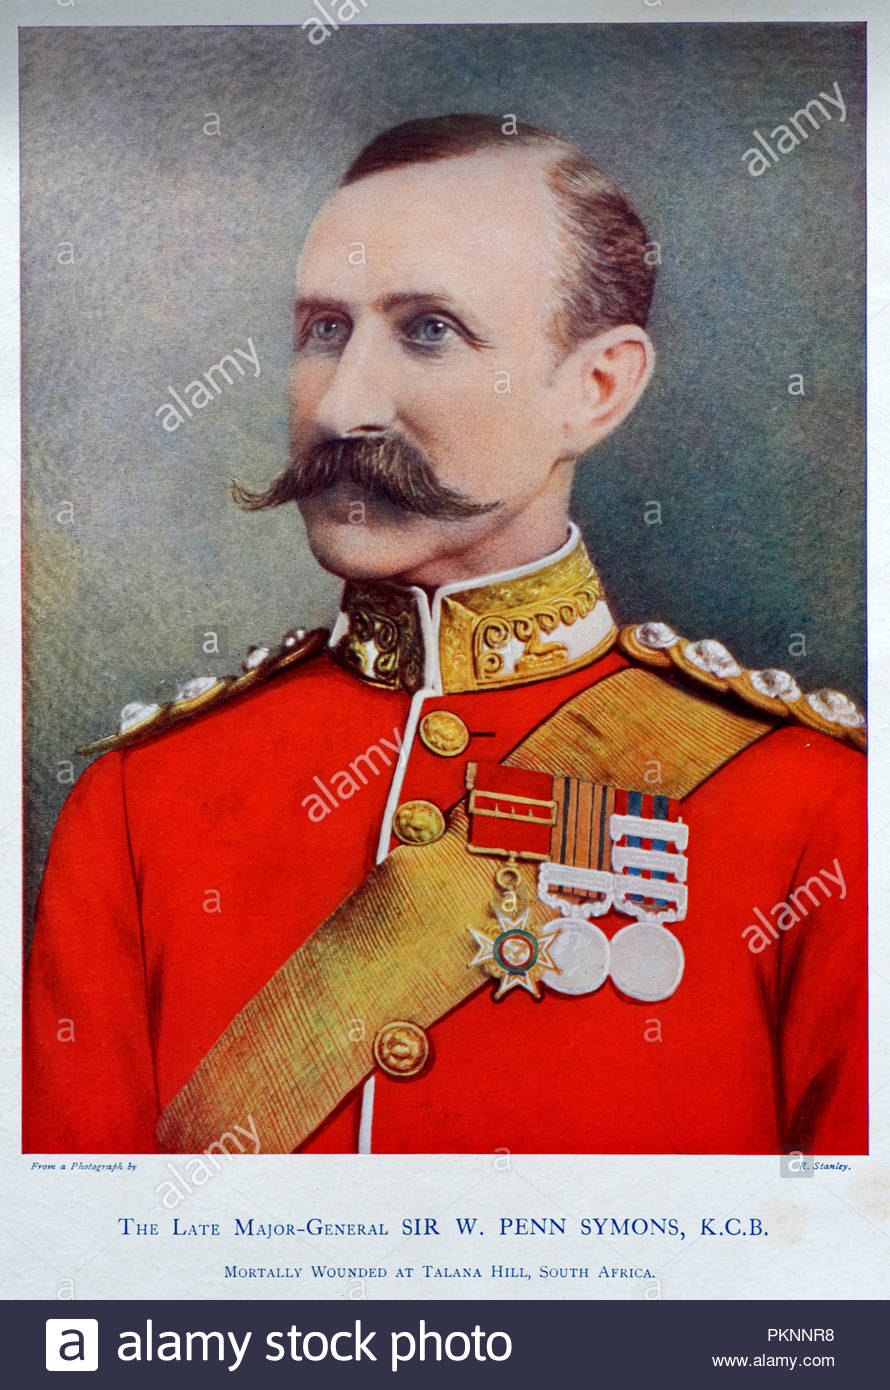 Major-General Sir William Penn Symons, 1843 – 1899, was a British Army officer who was mortally wounded as he commanded his forces at the Battle of Talana Hill during the Second Boer War. Colour illustration from 1900 Stock Photo